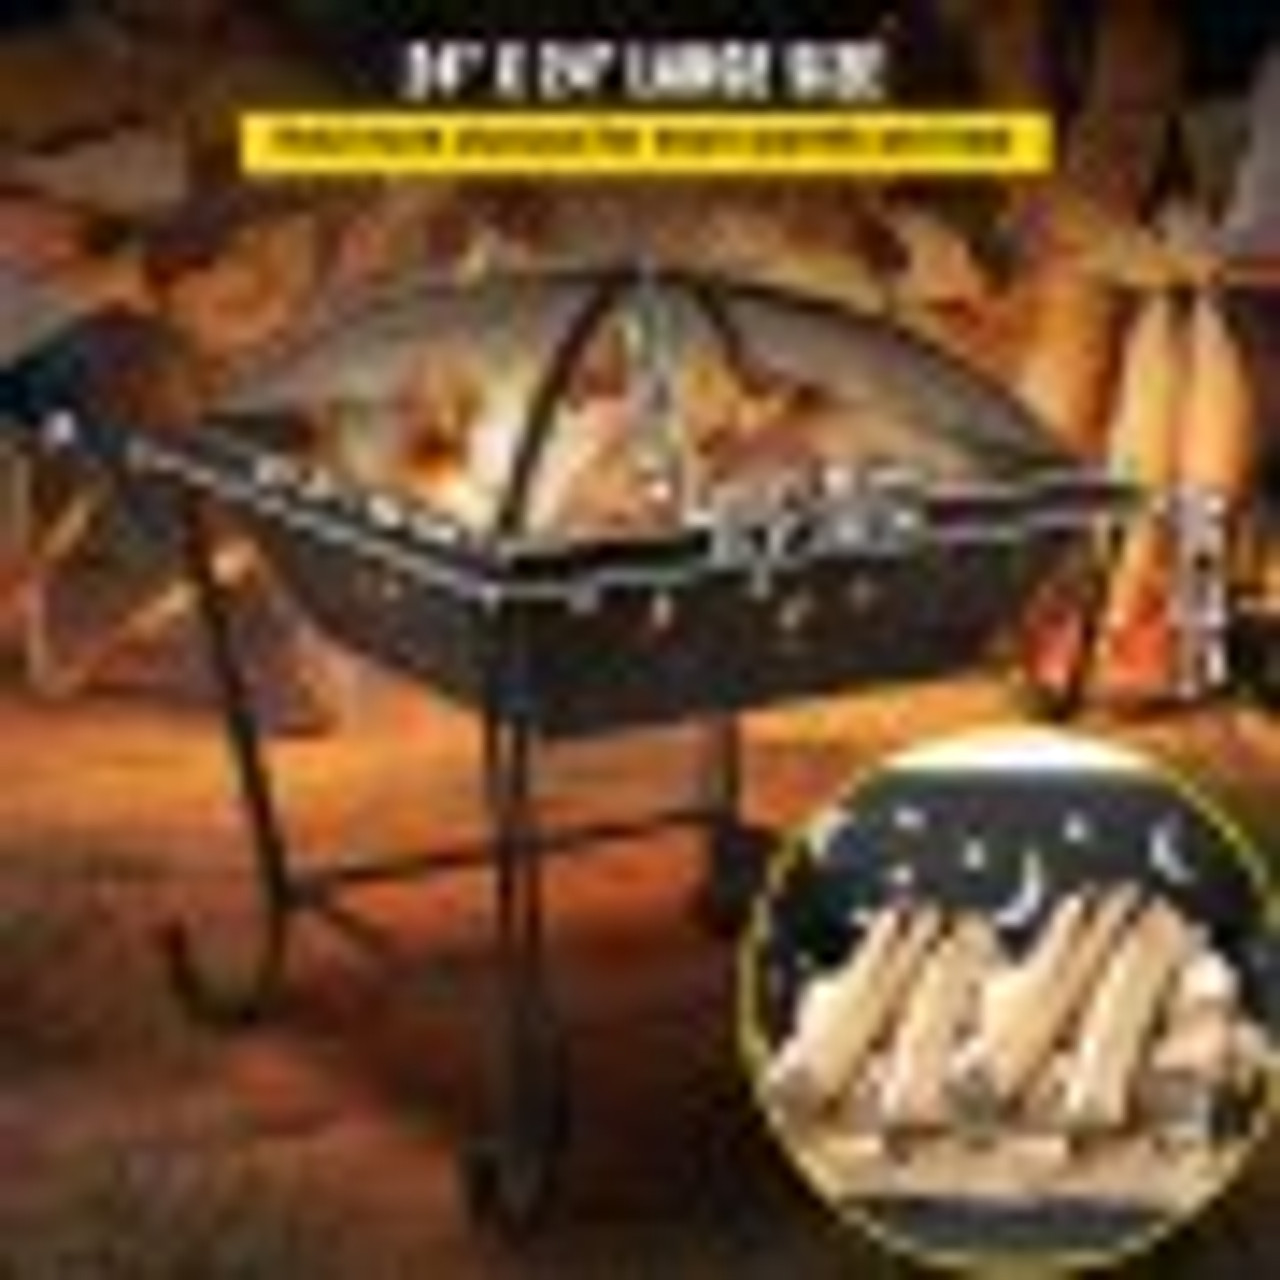 BBQ Grill Fire Bowl, 24"x24" Wood Burning Pit, Solid Steel Wood Fire Pits, Wood Fire Pits Outdoor w/ Spark Screen Cover, Fire Pits for Outside w/ Stainless Steel Baking Net for Baking & Warming